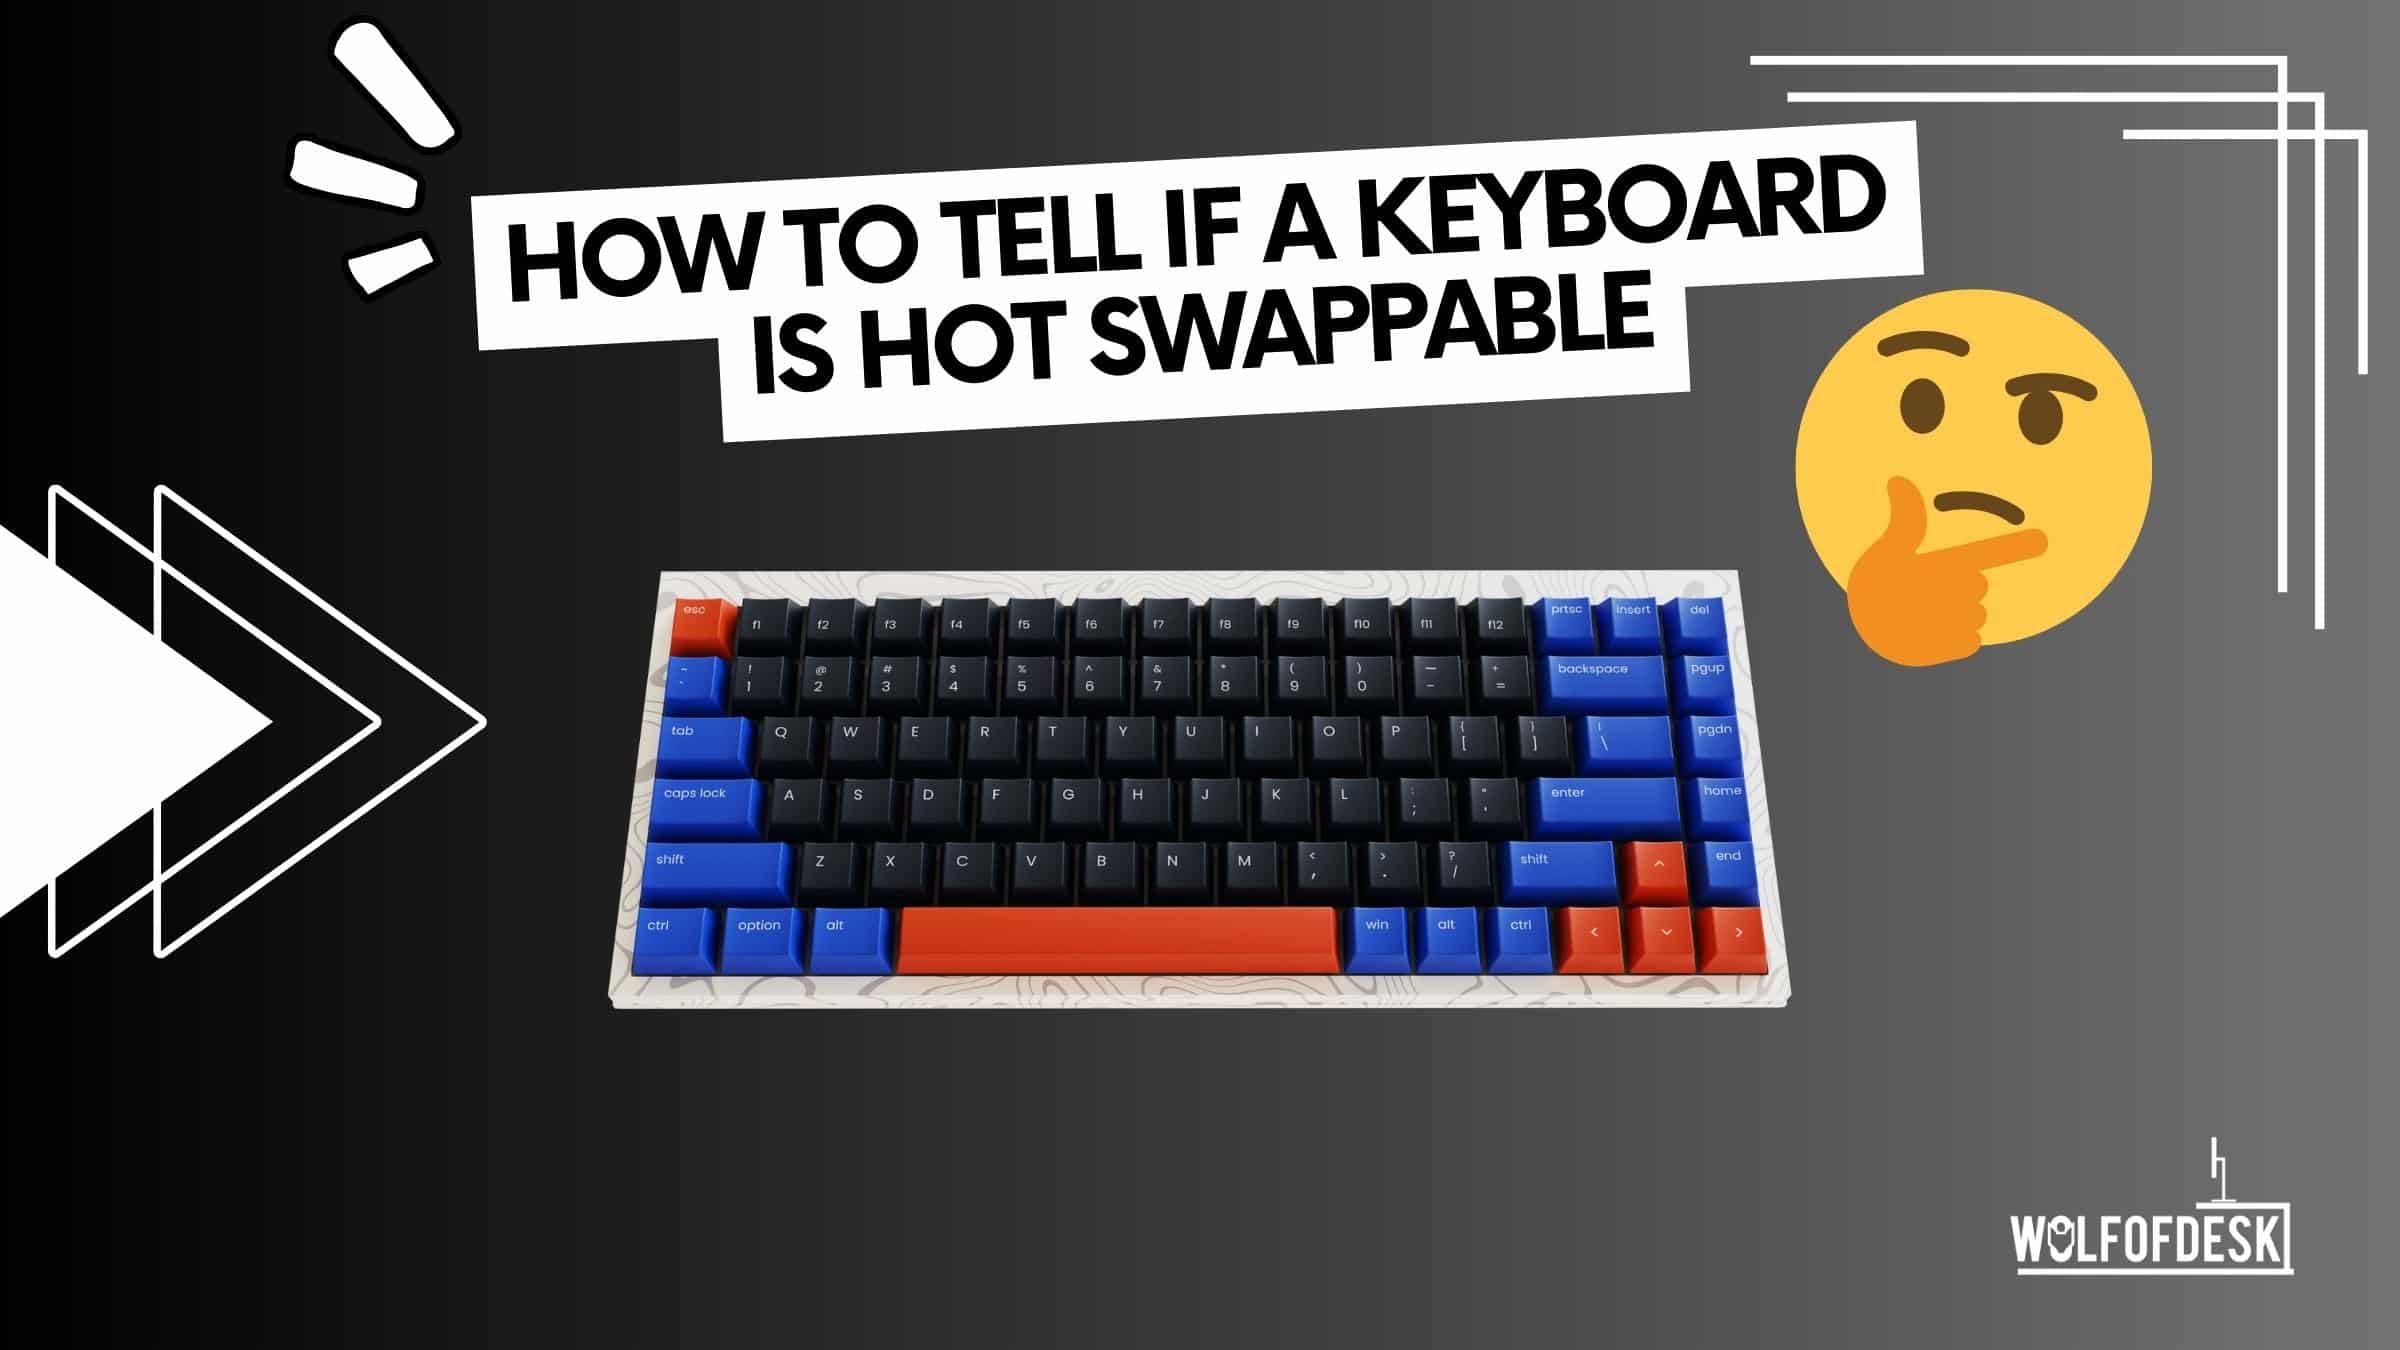 how to tell if a keyboard is hot swappable or not